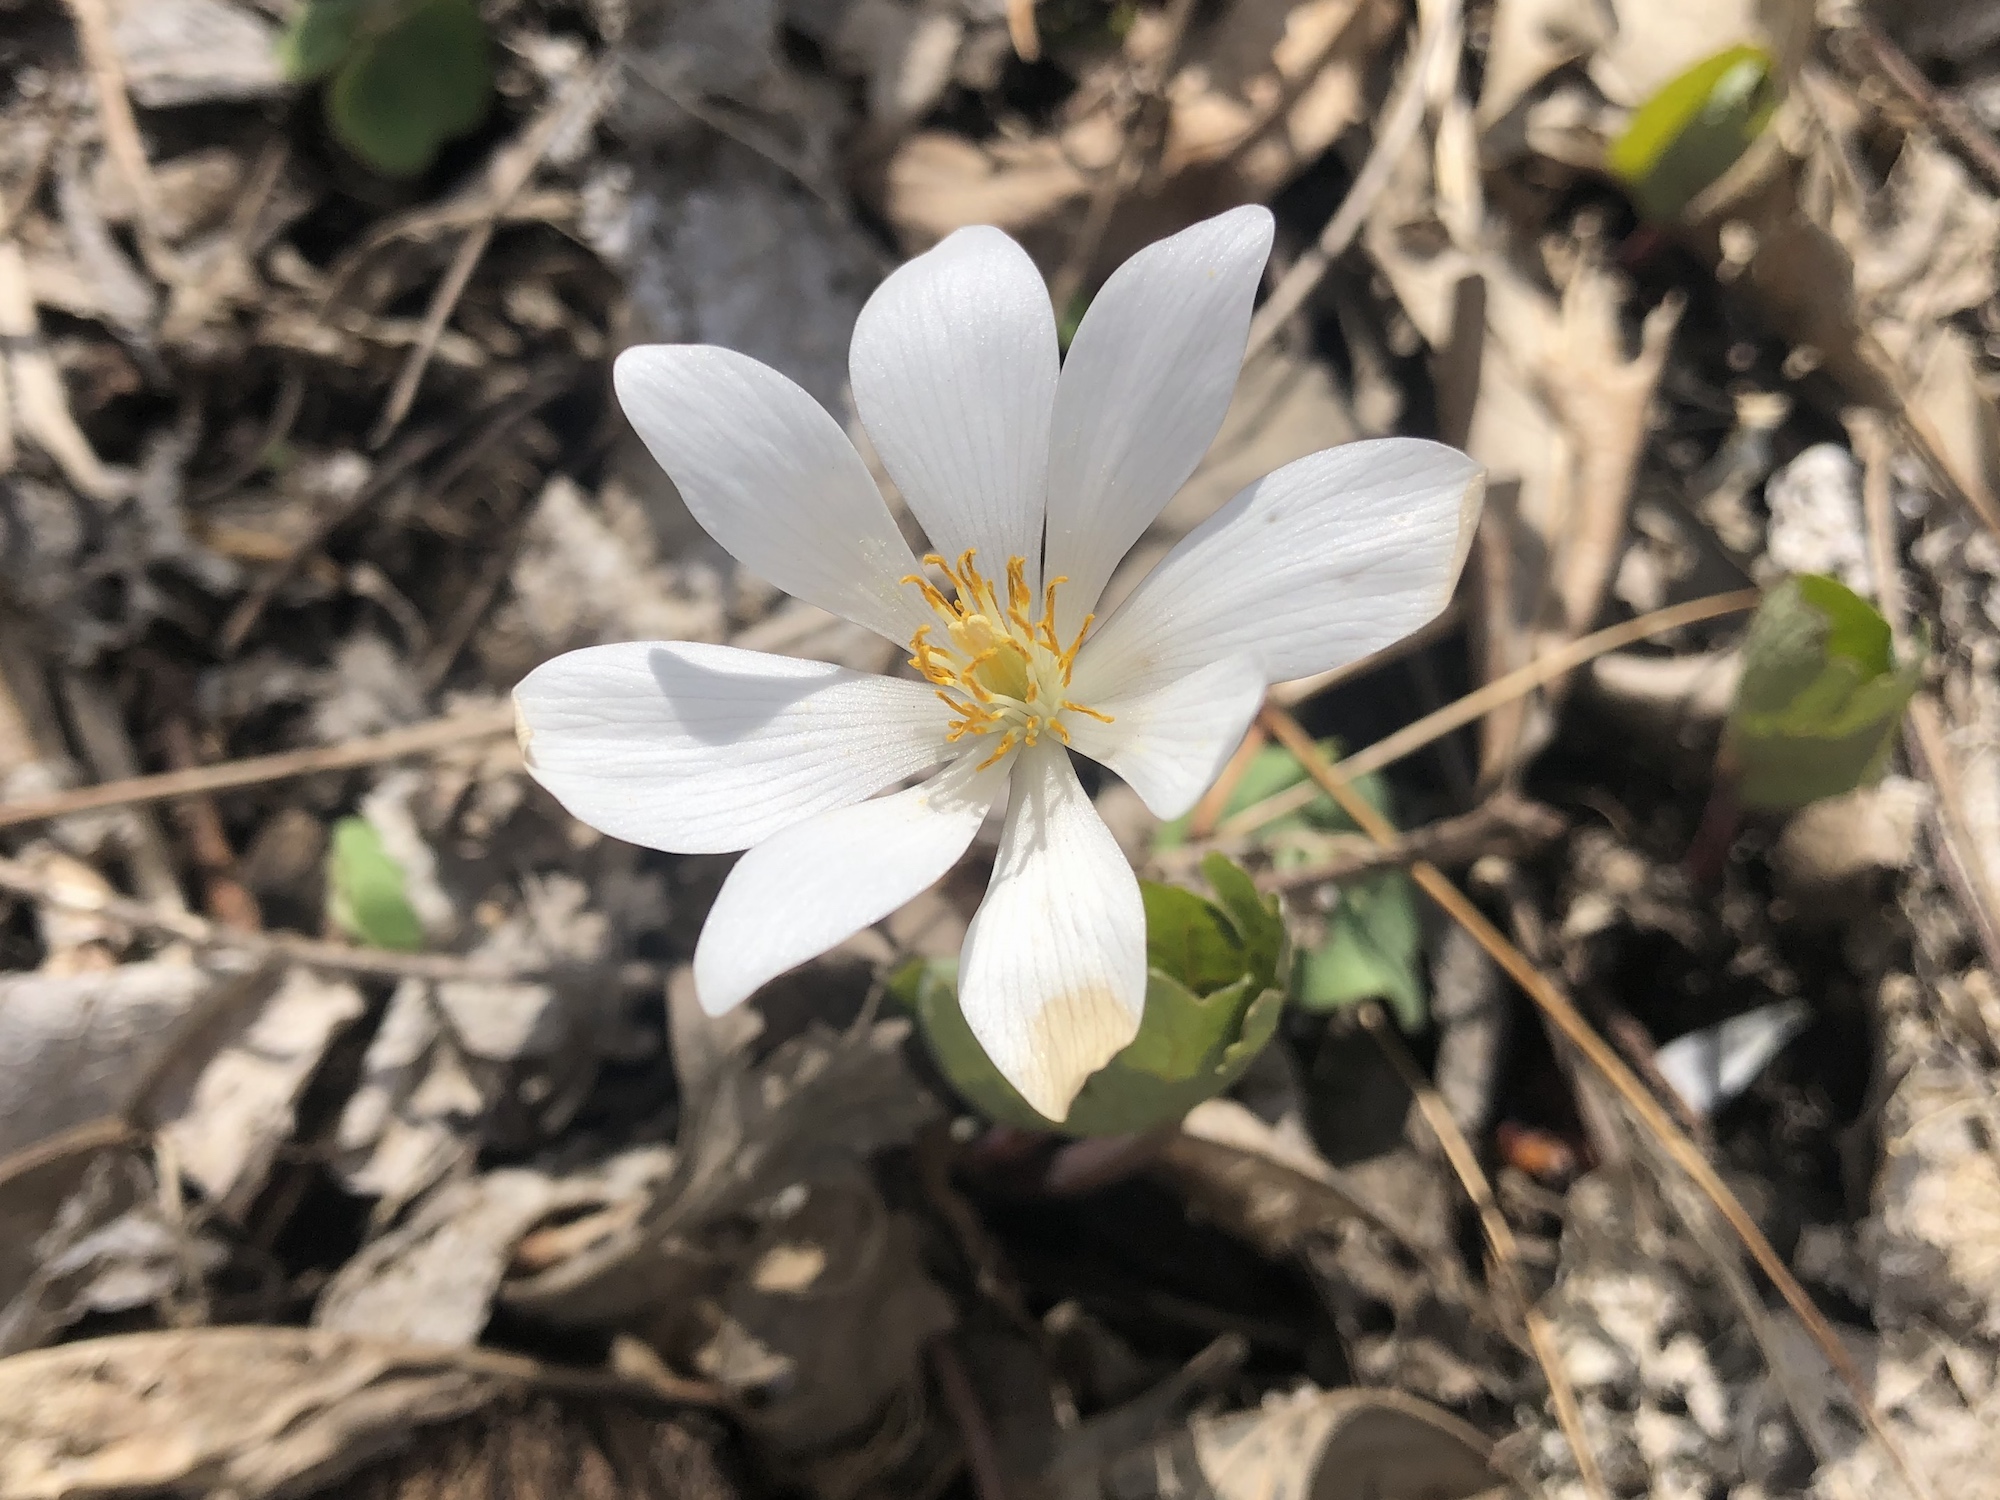 Bloodroot in Oak Savanna by Council Ring in Madison, Wisconsin on April 20, 2020.